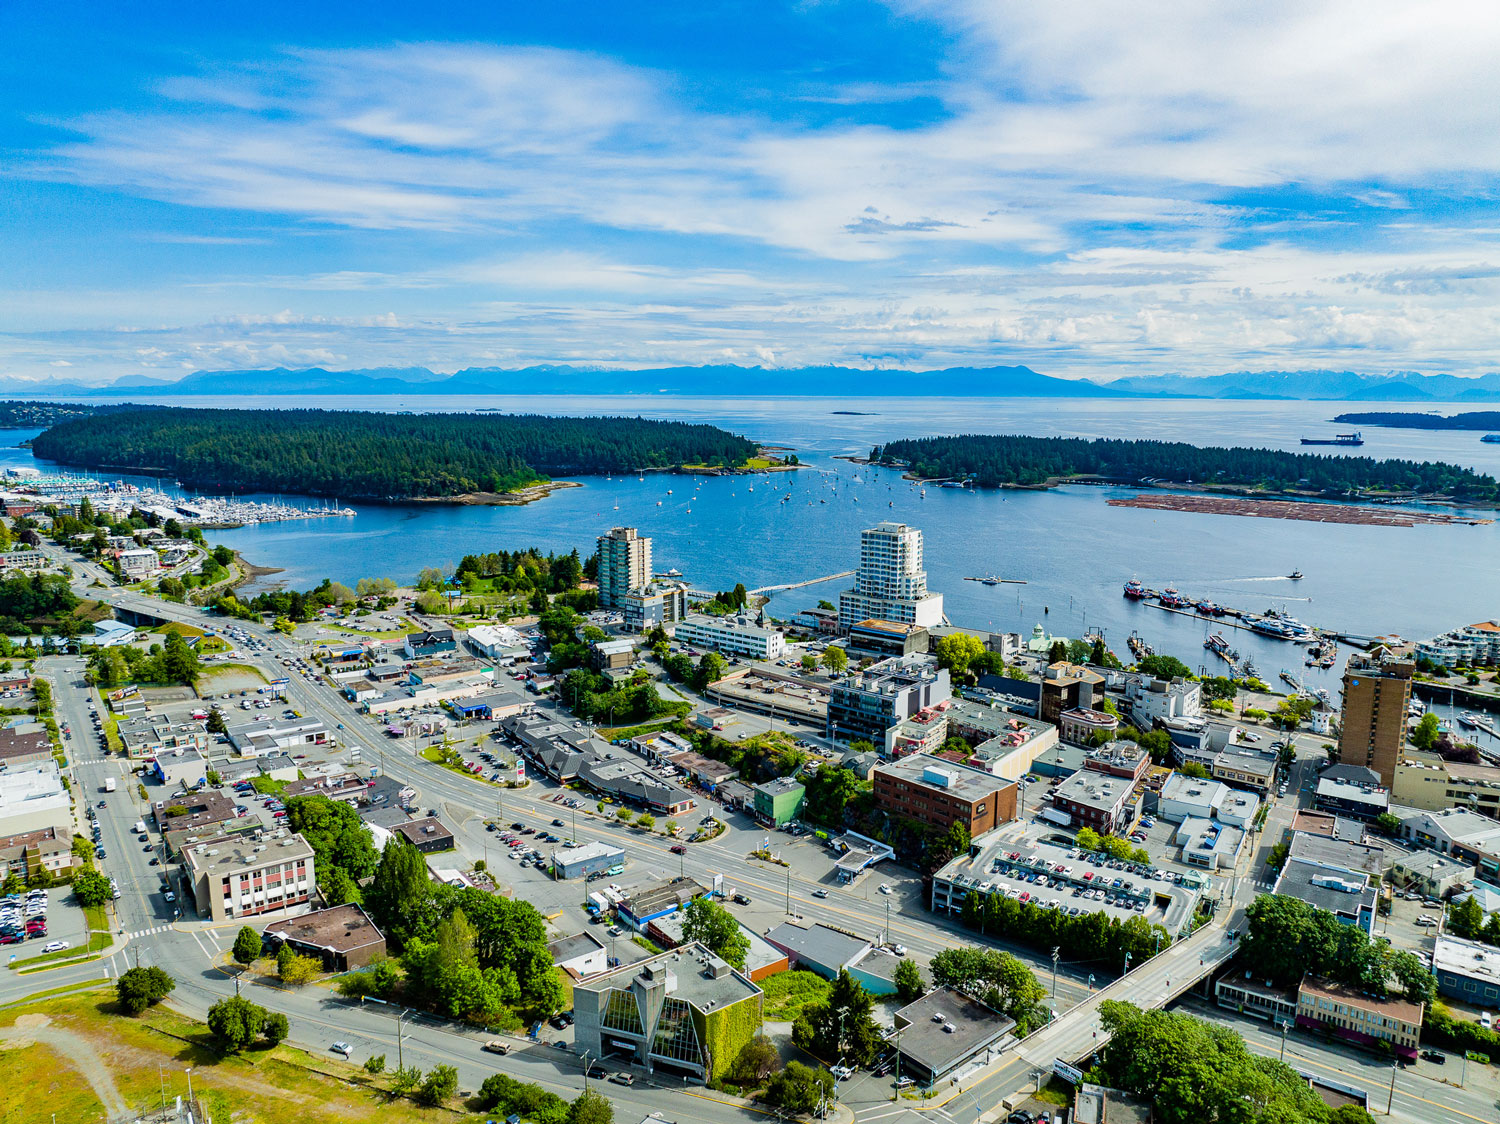 'Nanaimo's economic outlook bright as 'Hub City' makes big industry, housing investments' by William Wright Commercial for Citified